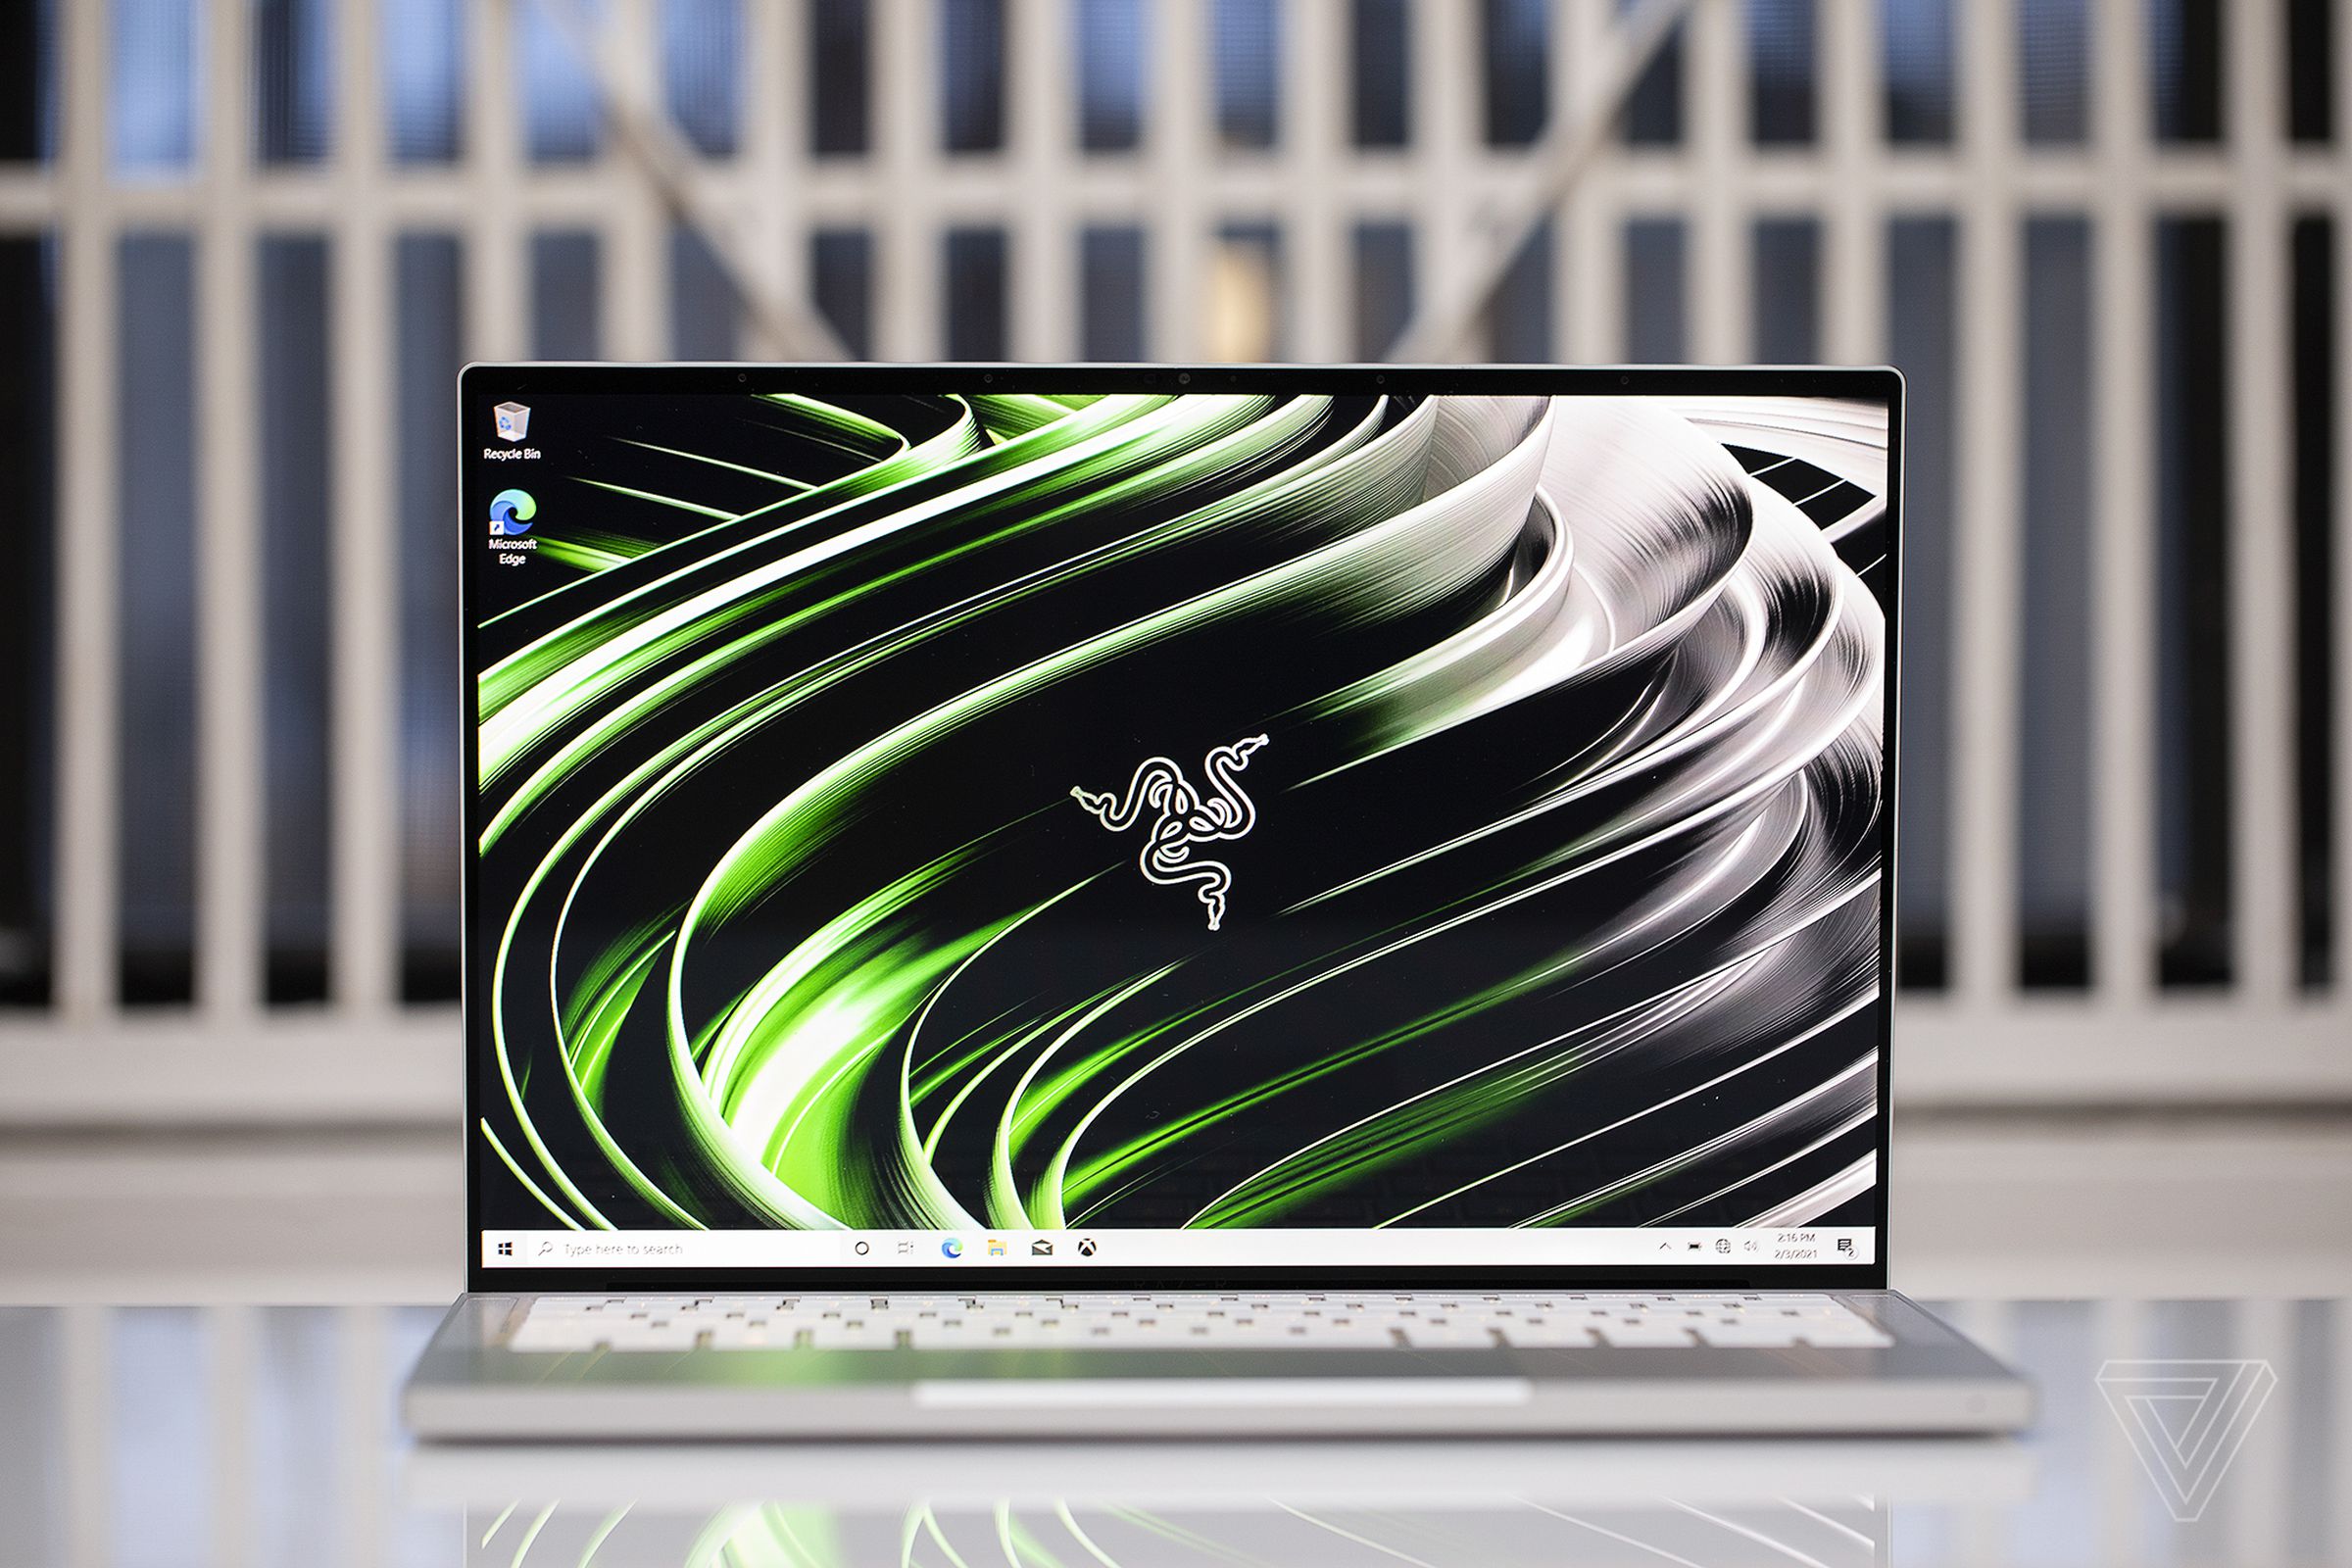 The Razer Book 13 open. The screen displays the Razer logo on a green and black background.